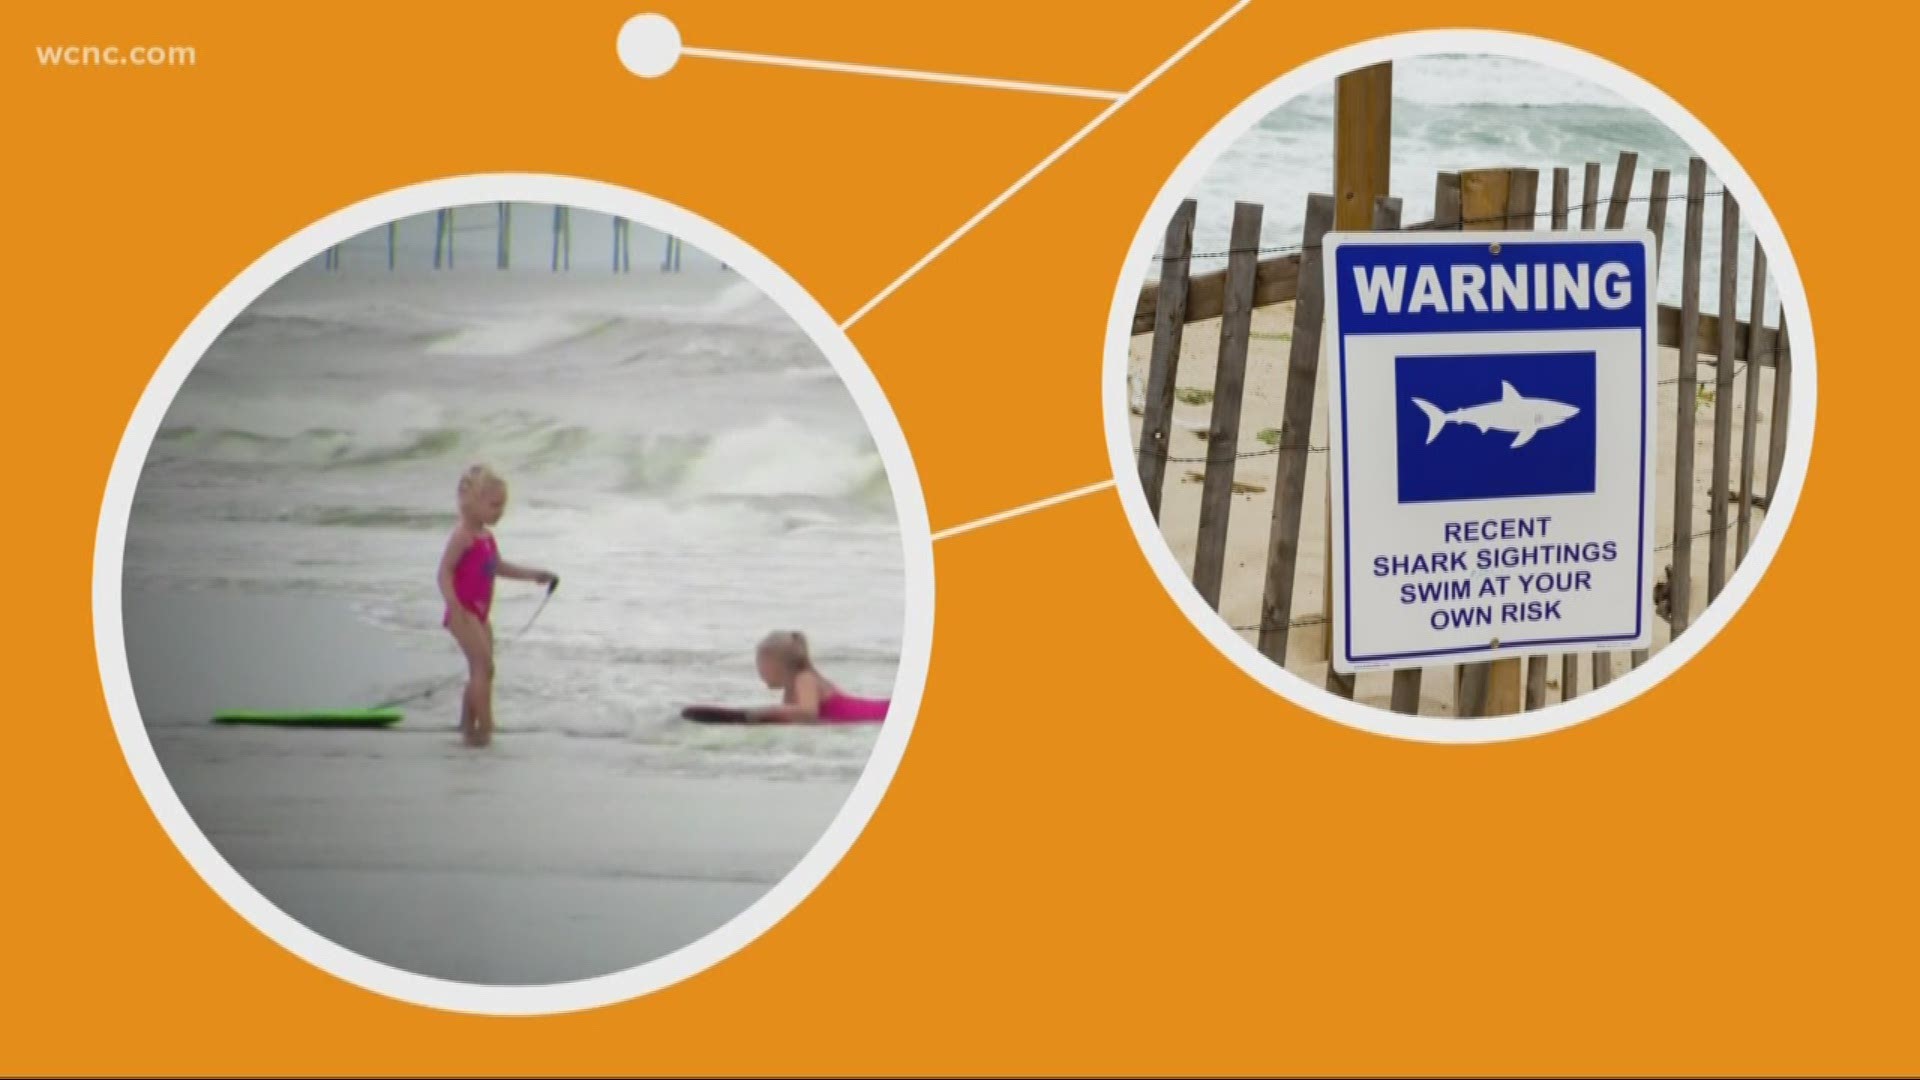 Are you thinking about taking a family vacation to the coast but worried about recent shark attacks? Here's what you need to know after three attacks this month alone in North Carolina.